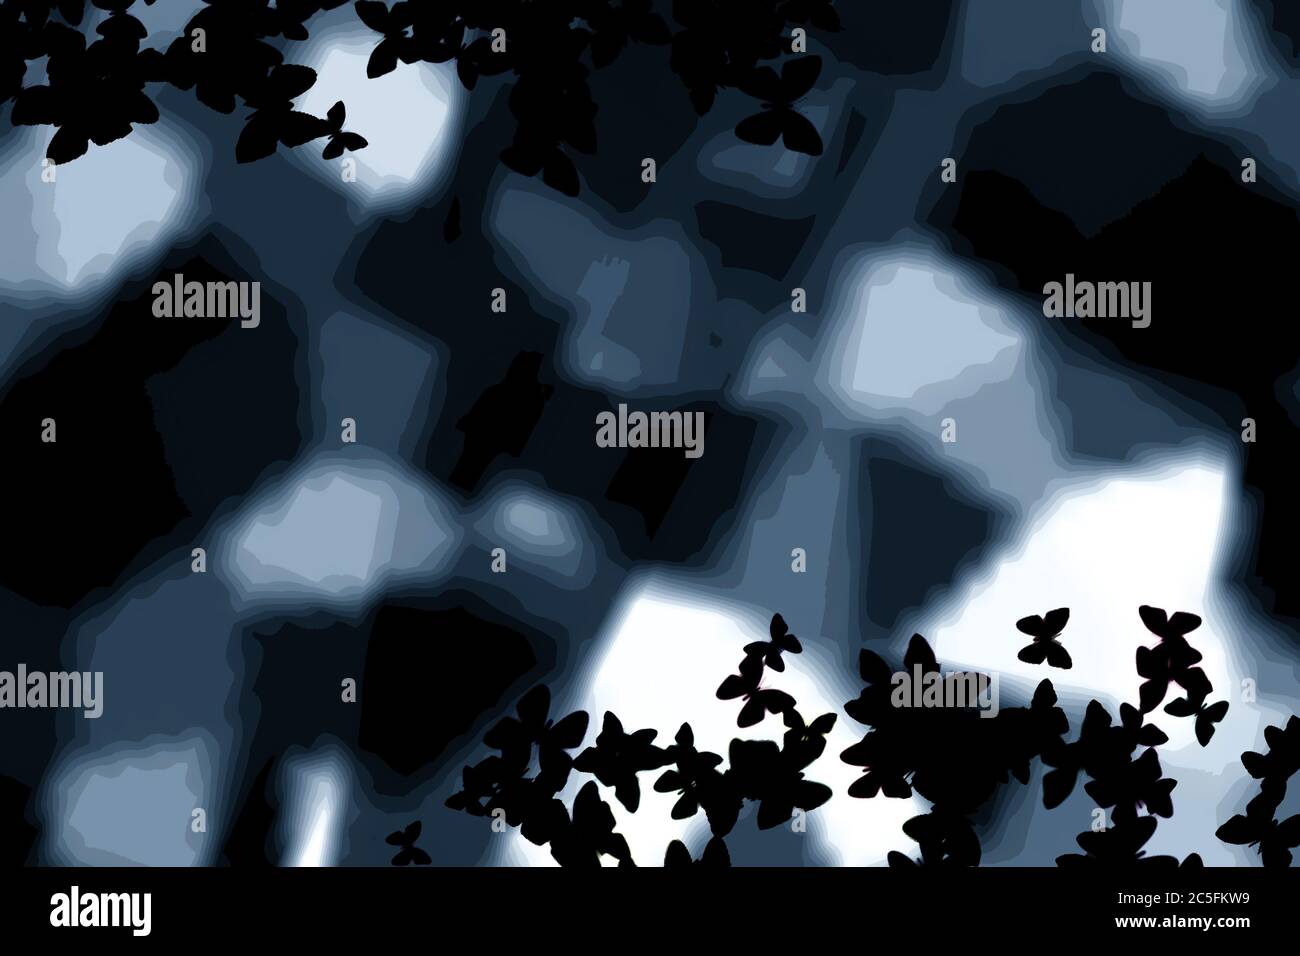 Moody, dark background graphic with black butterflies, concept for contrast, light and dark, black and white, contrasting moods, opposites Stock Photo